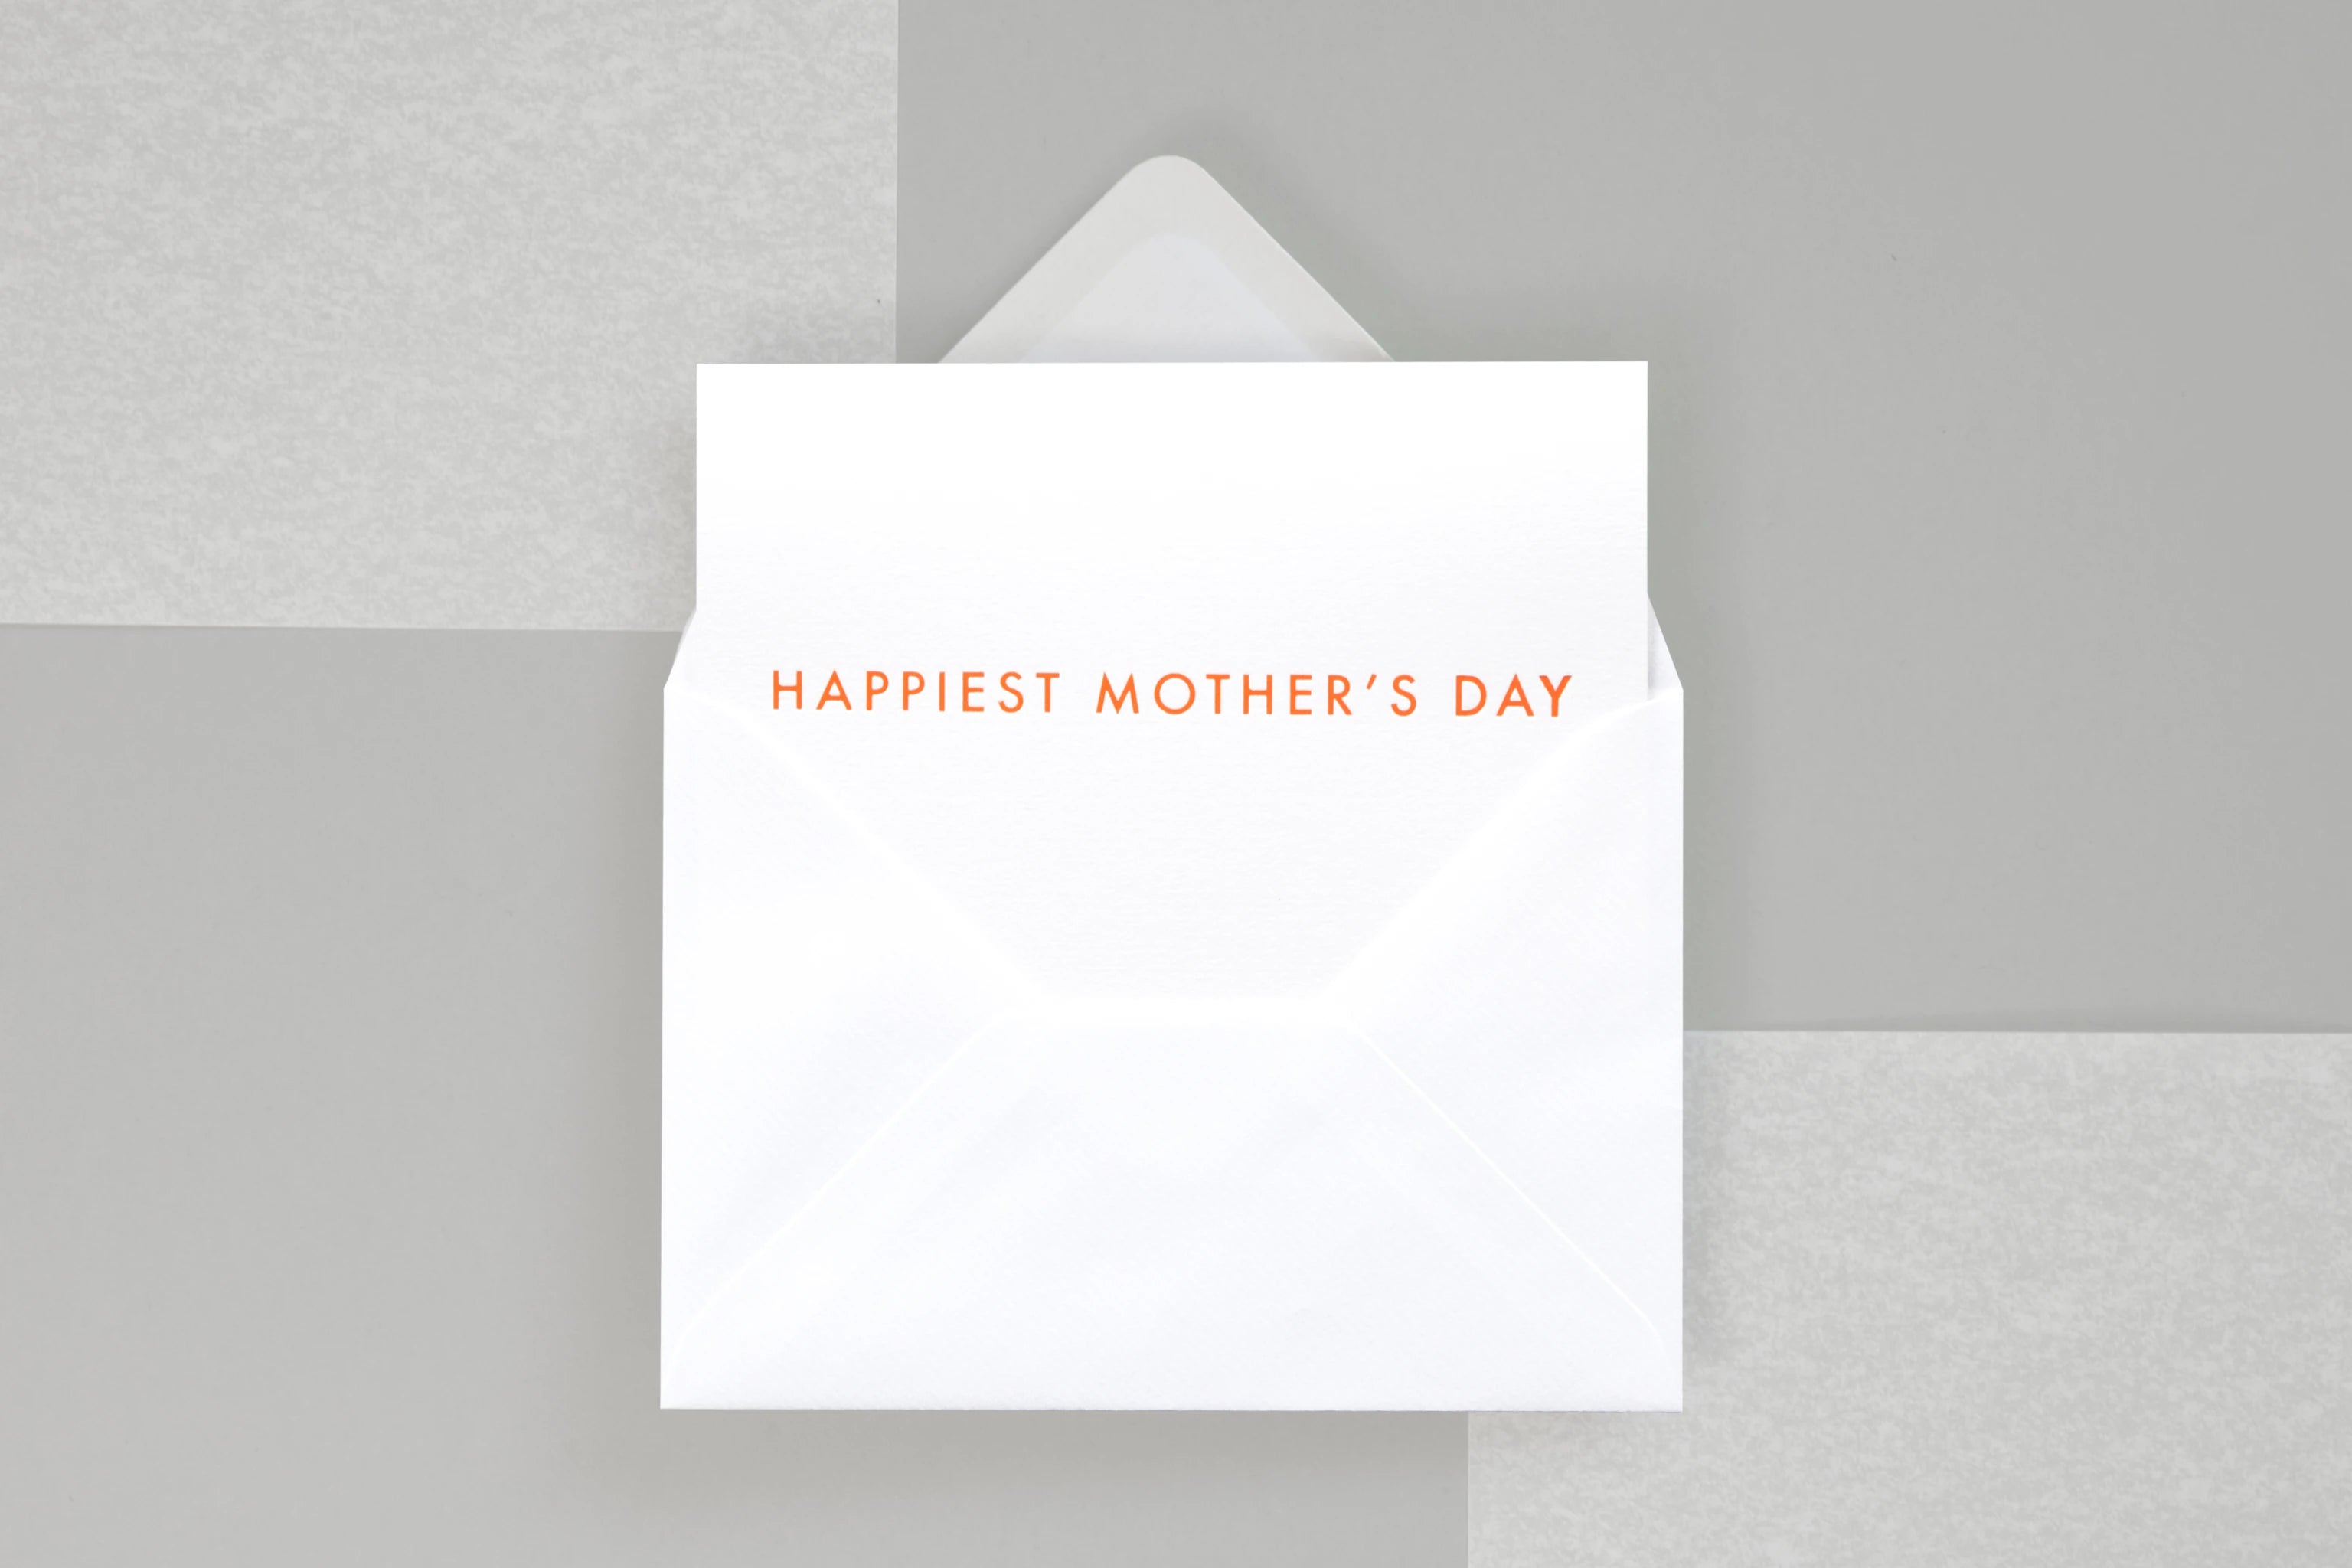 Happiest Mother's Day by Ola - Lifestory